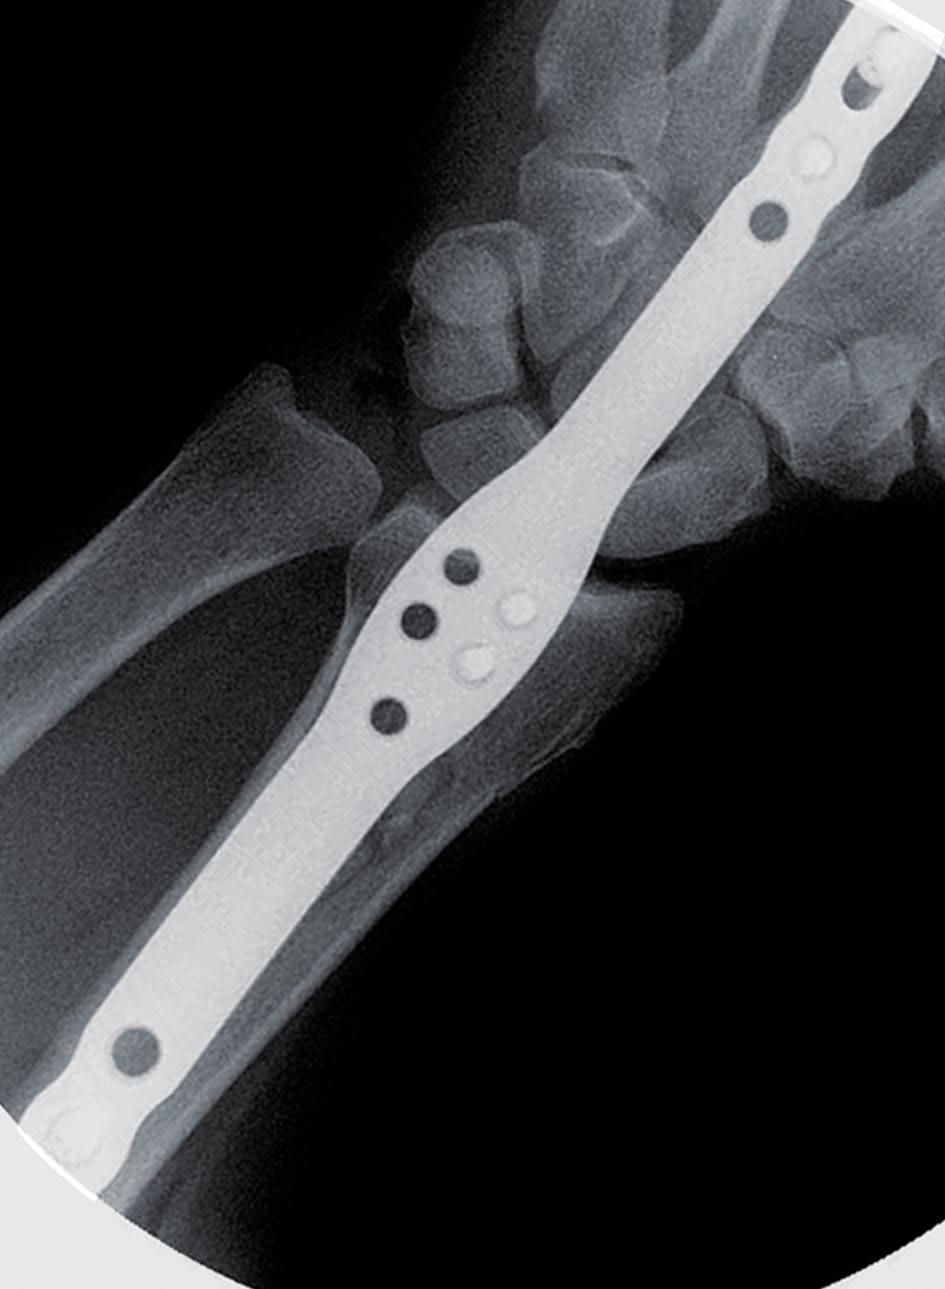 temporary basis while the distal radius heals. The Acu-Loc Wrist Spanning Plate is indicated for fixation of fractures, osteotomies, and nonunions of the radius.